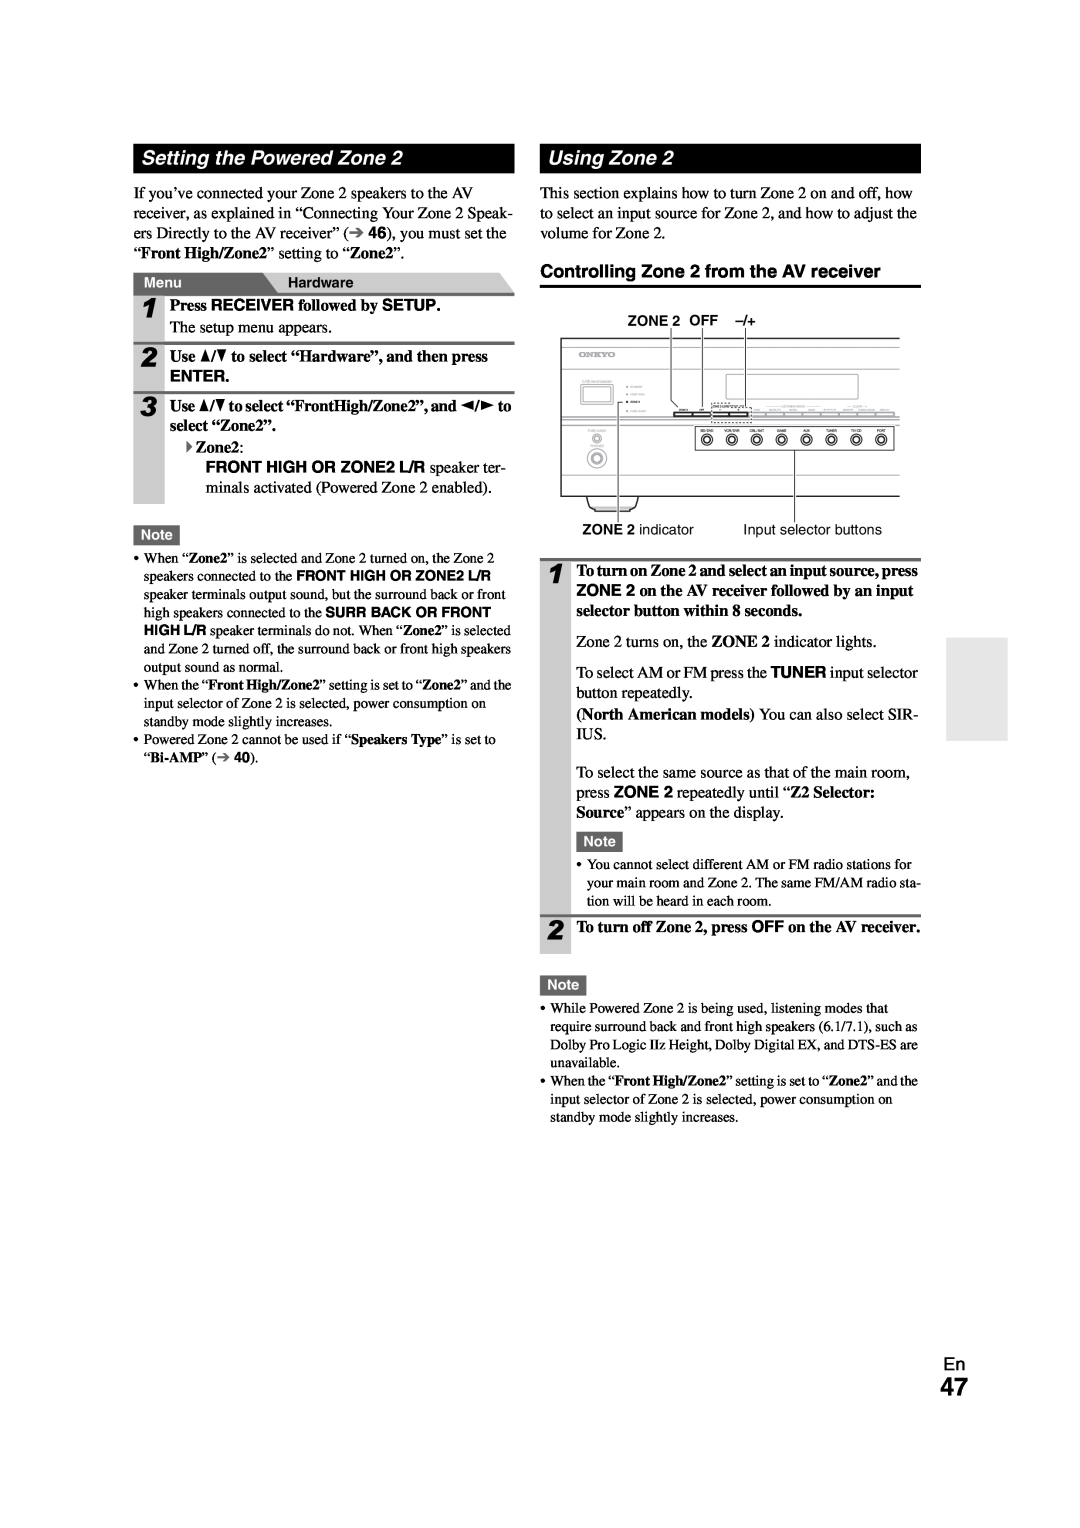 Onkyo TX-SR508 instruction manual Setting the Powered Zone, Using Zone, Controlling Zone 2 from the AV receiver, Enter 